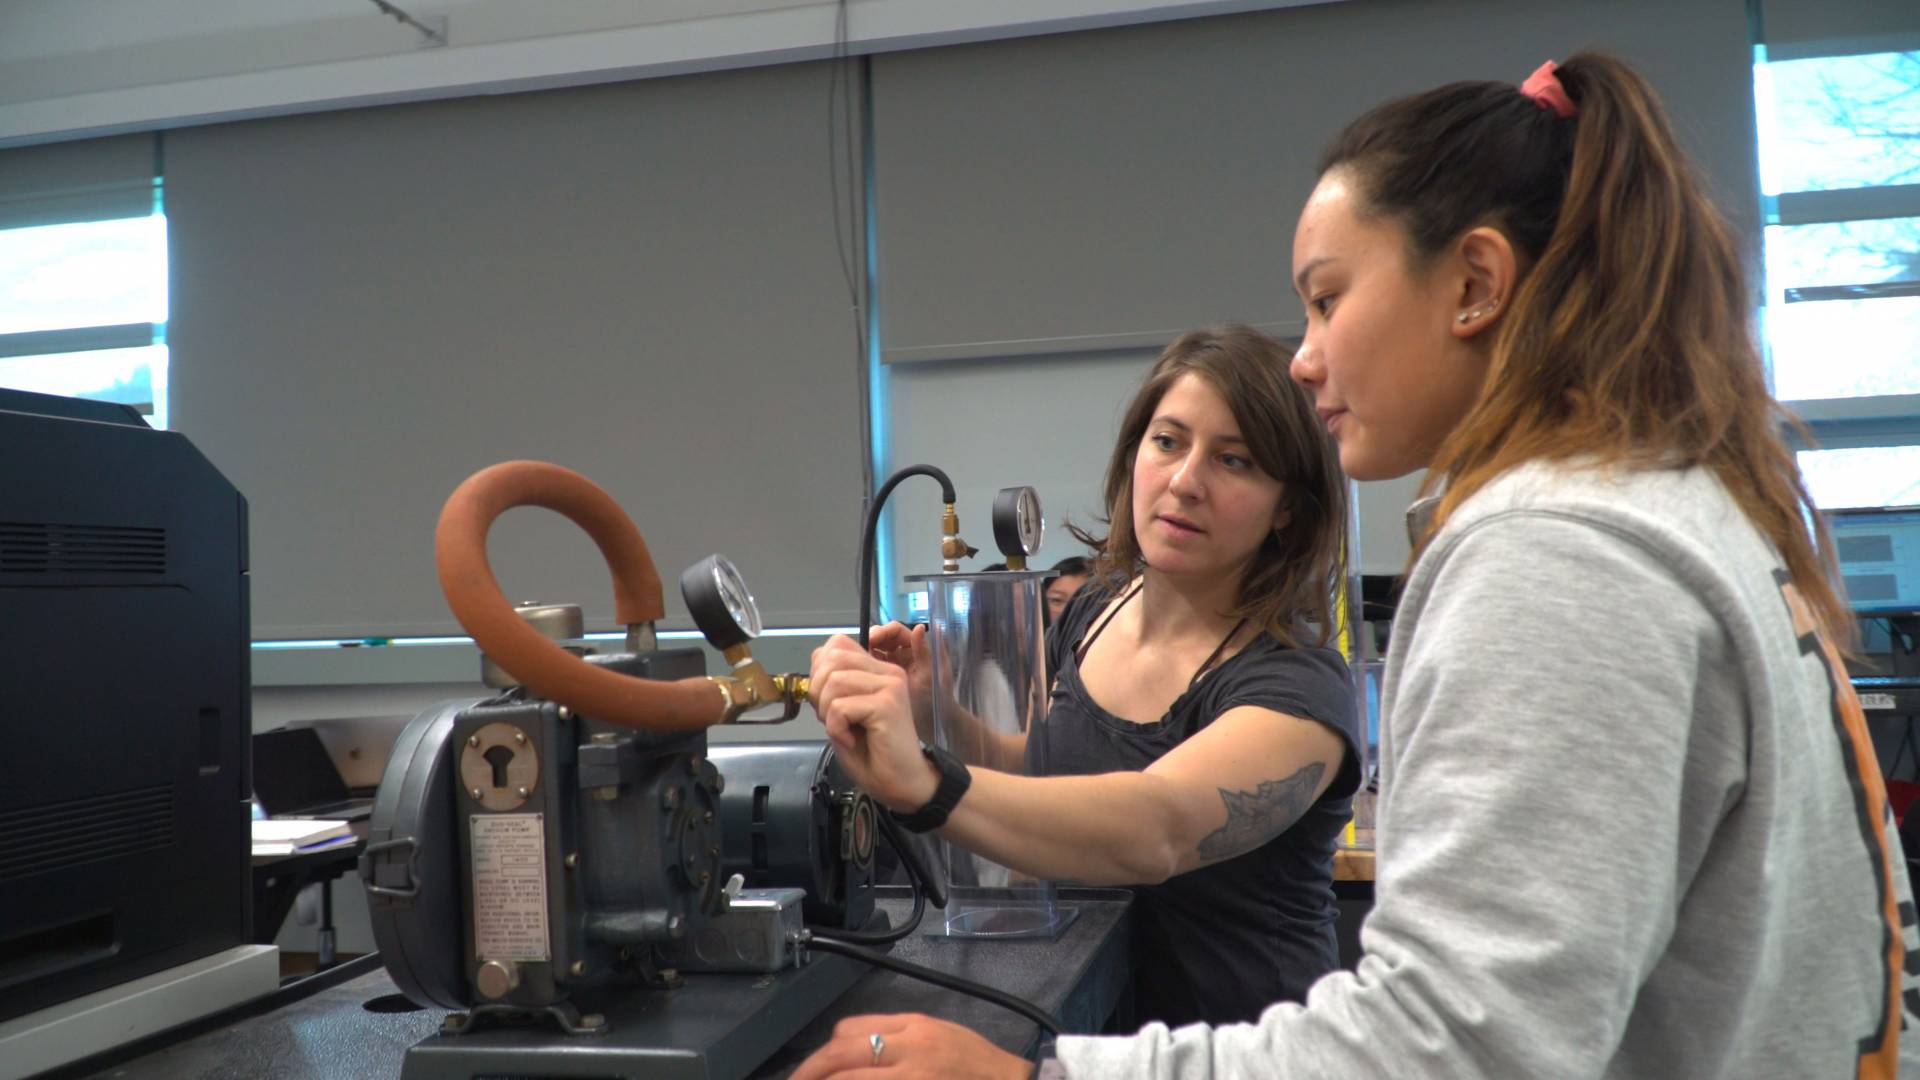 Instructor working with student in physics lab